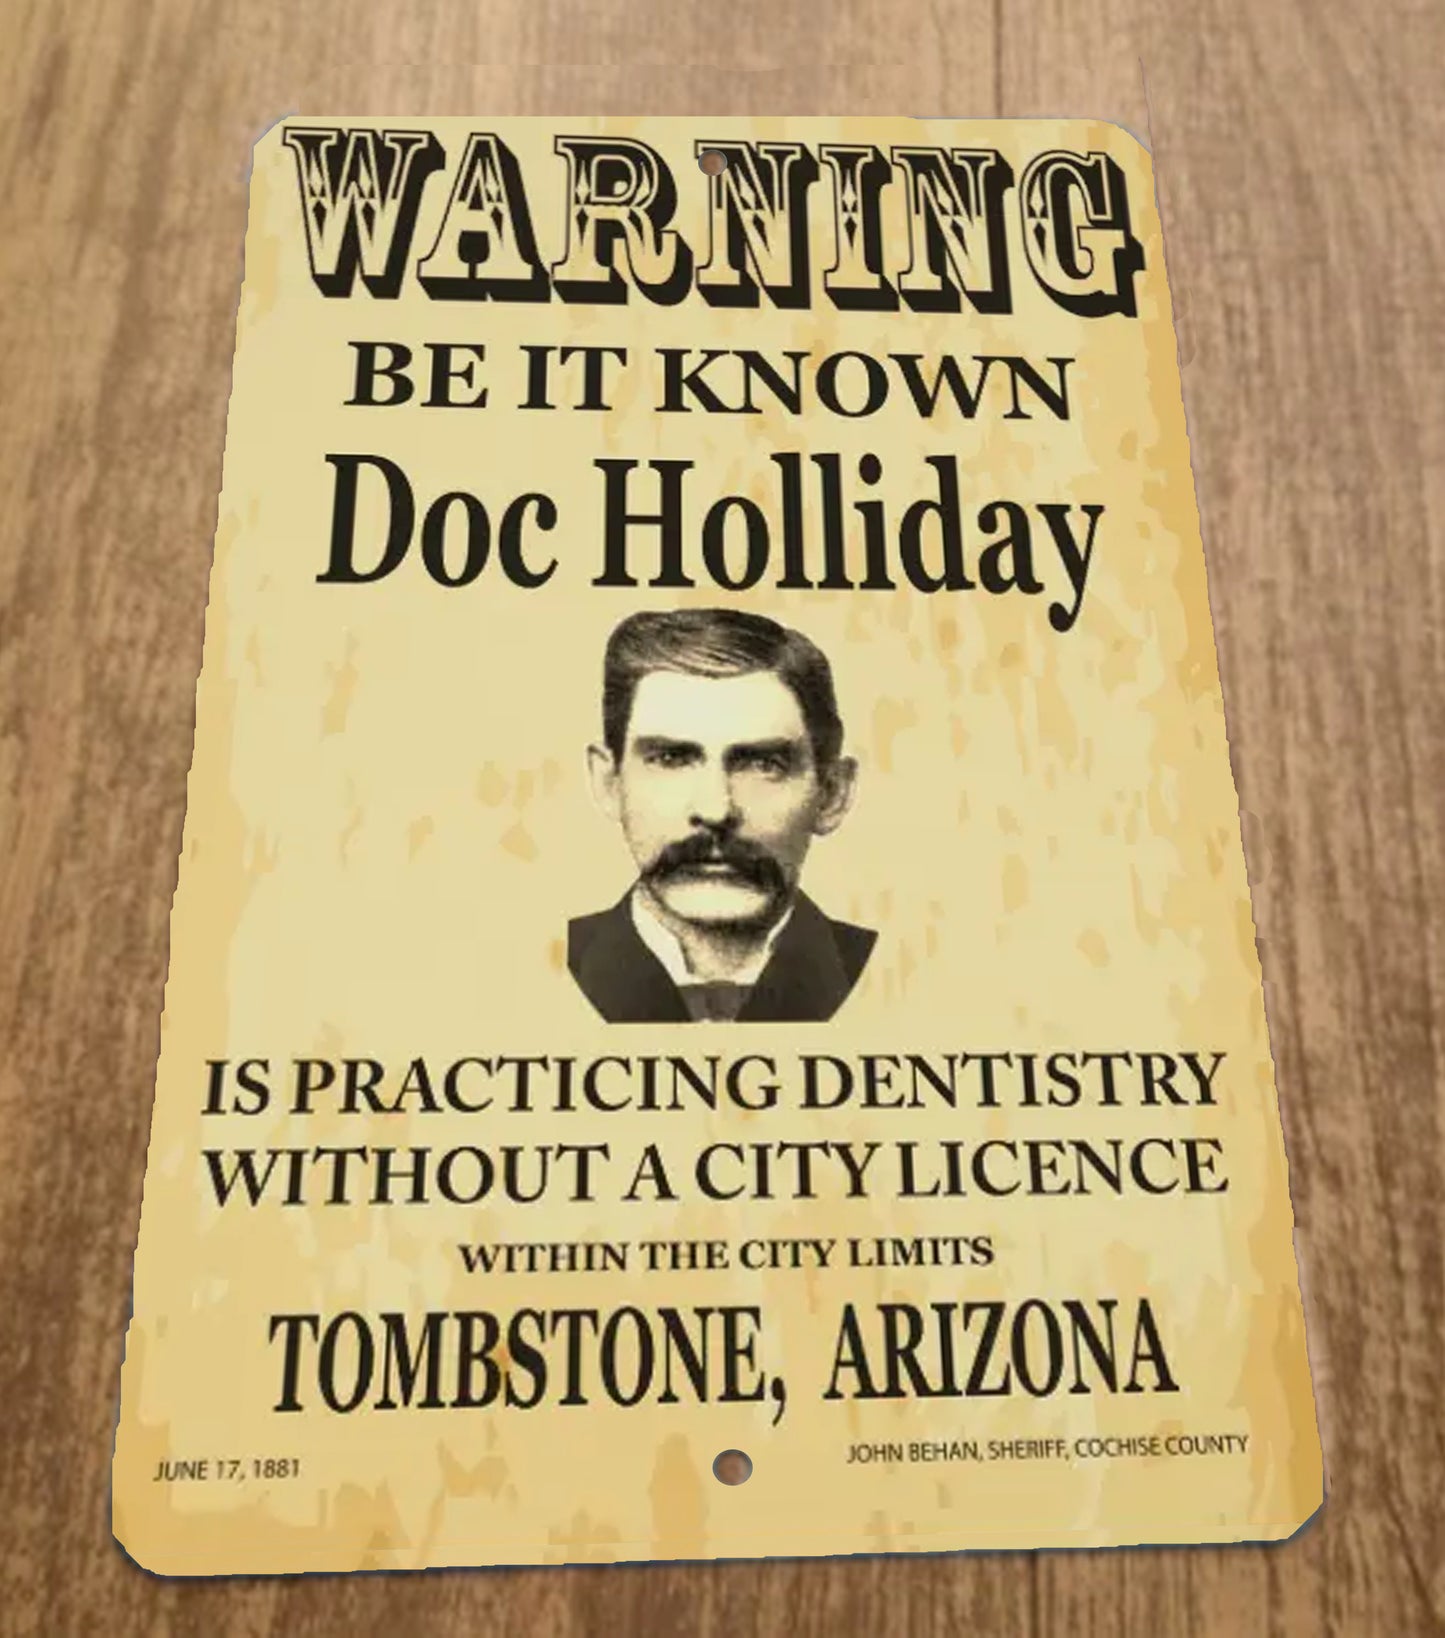 Warning Doc Holiday Practicing Dentistry No License Tombstone Movie 8x12 Metal Sign